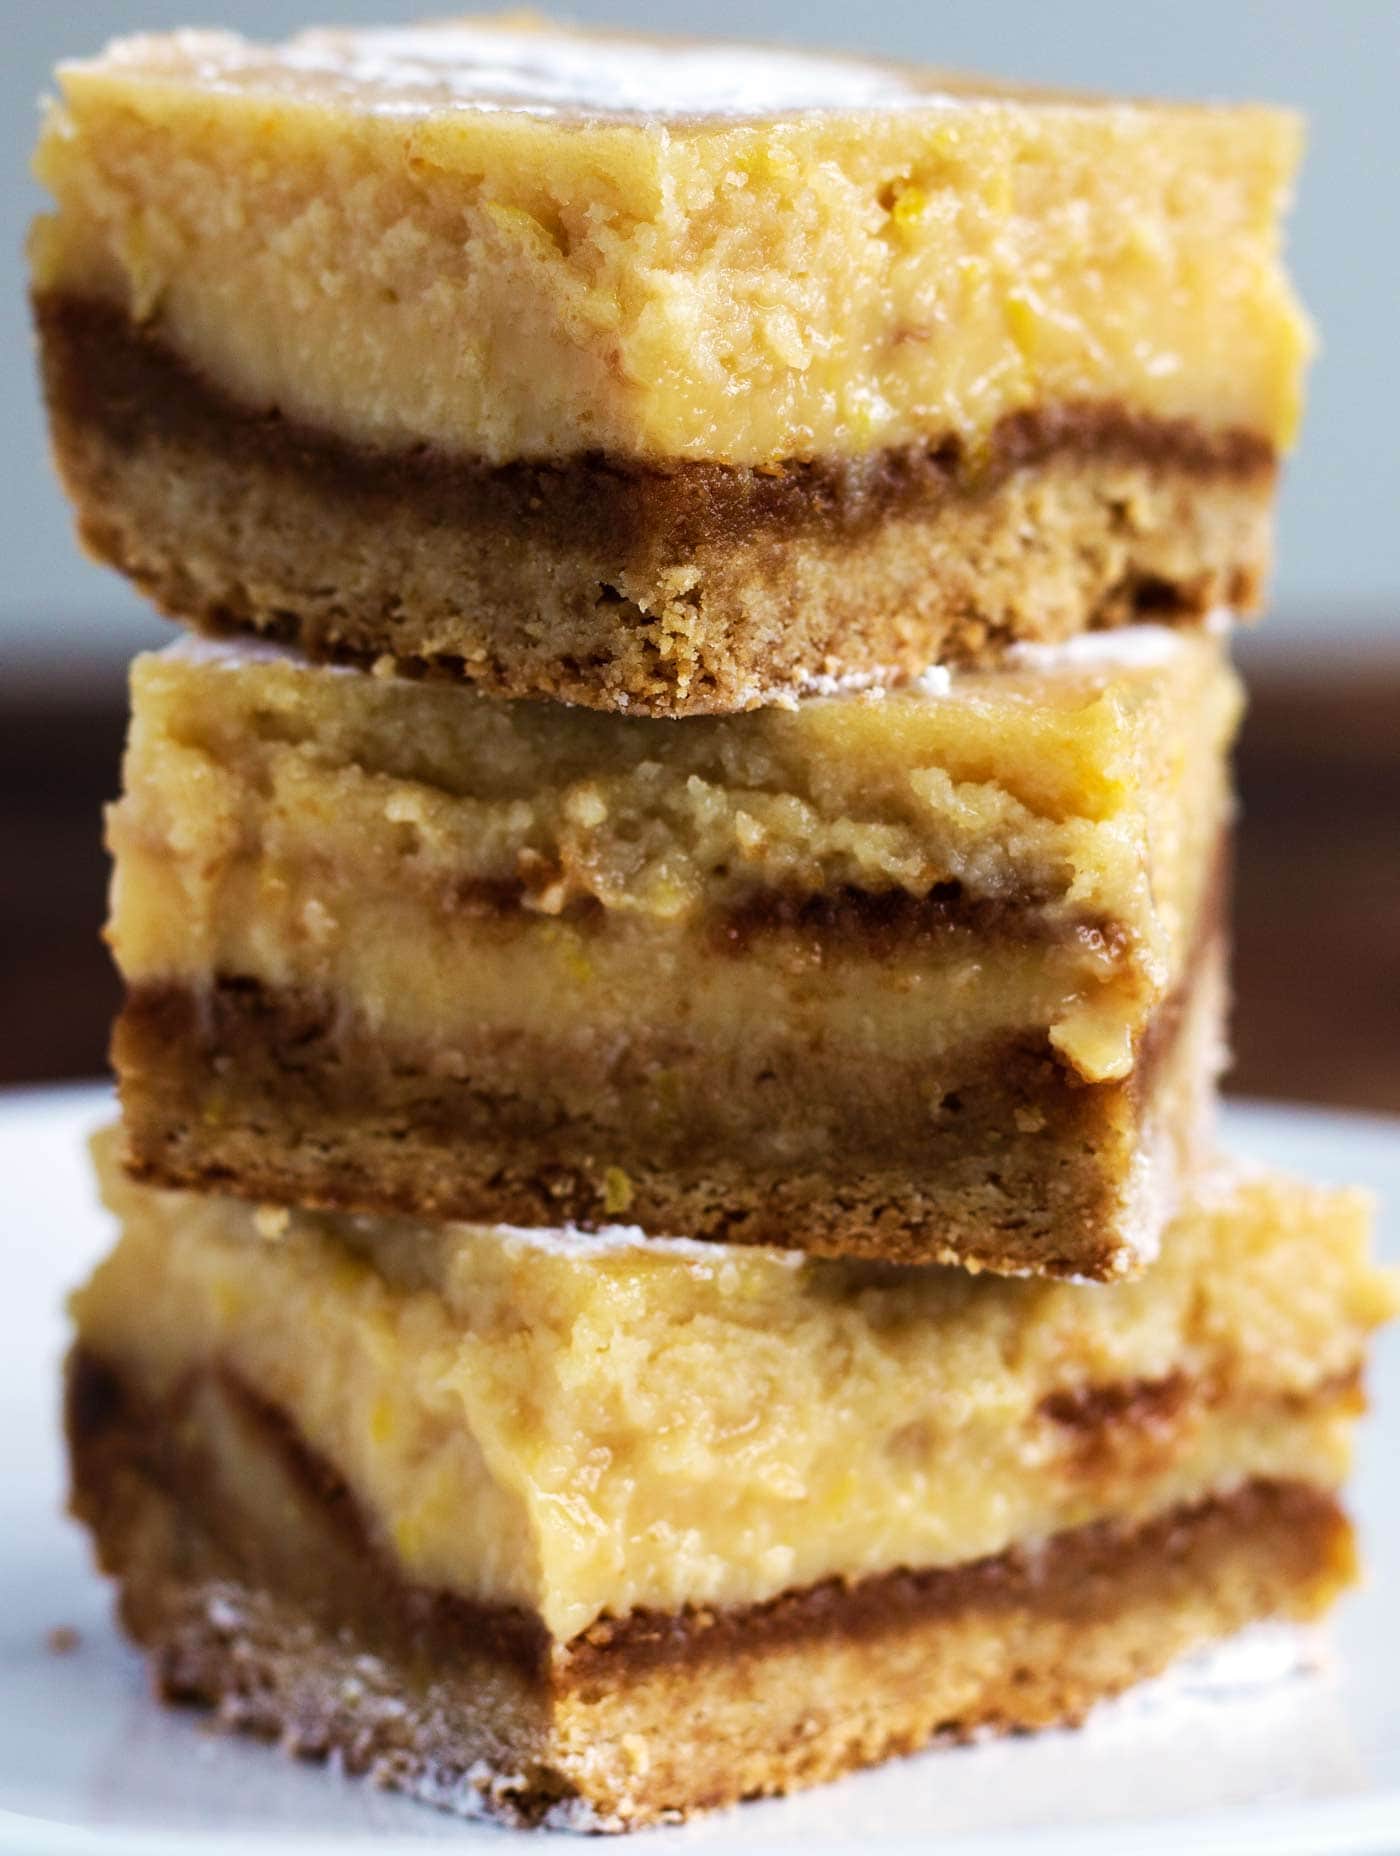 So easy to make! These lemon bars are paleo, gluten free, dairy free, and naturally sweetened with honey and coconut sugar!